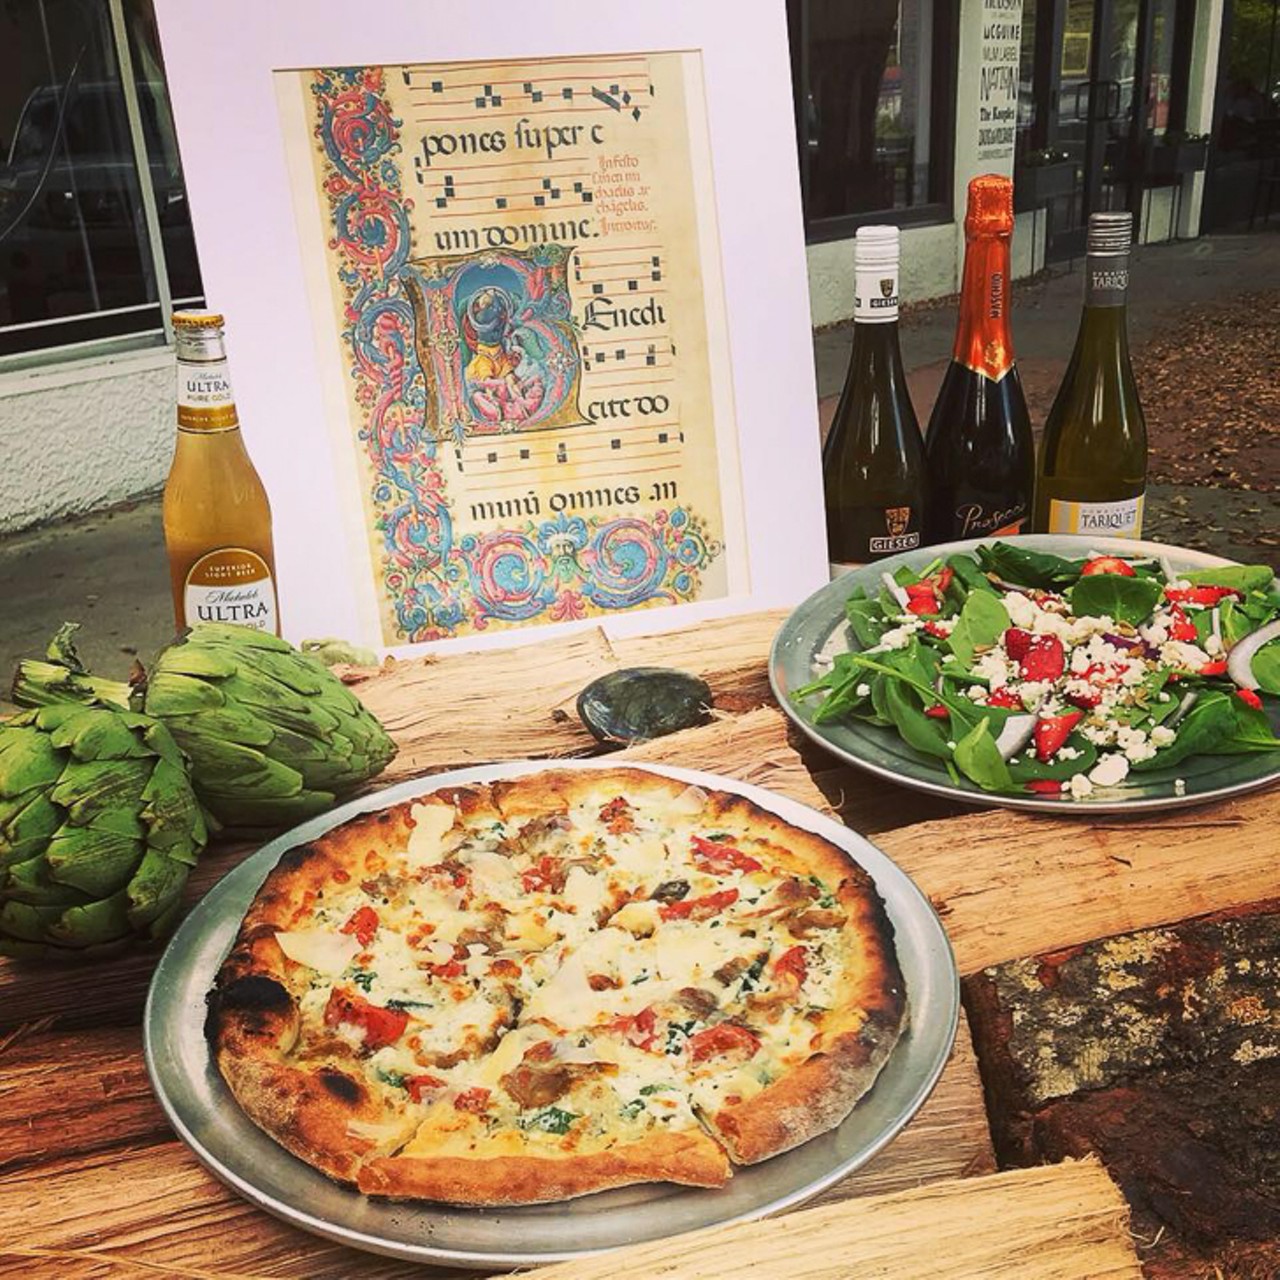 Pizza Box  
923 Central Ave., St. Petersburg
This restaurant in St. Petersburg specializes in organic and handmade food. Oh, and the pizza is wood-fired.
Photo via Pizza Box/Facebook